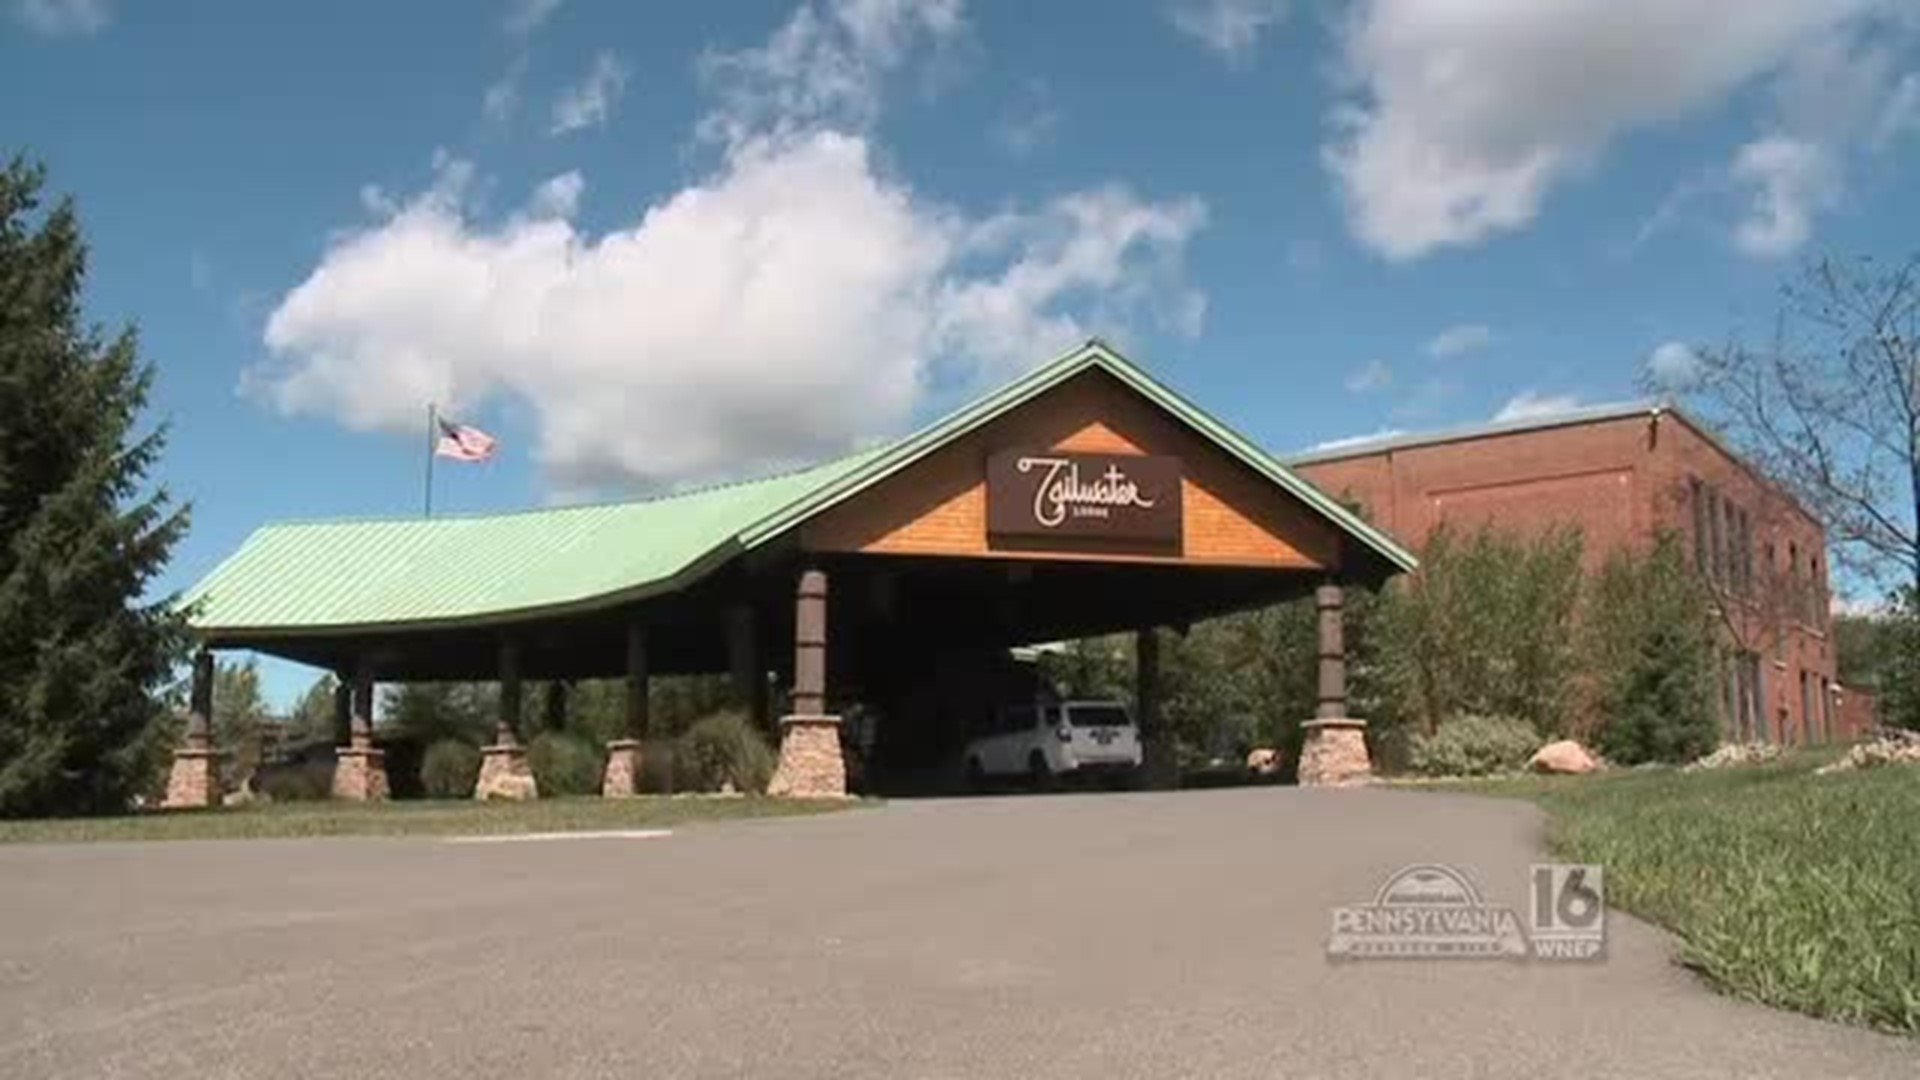 Tour Oswego County and the Tailwater Lodge